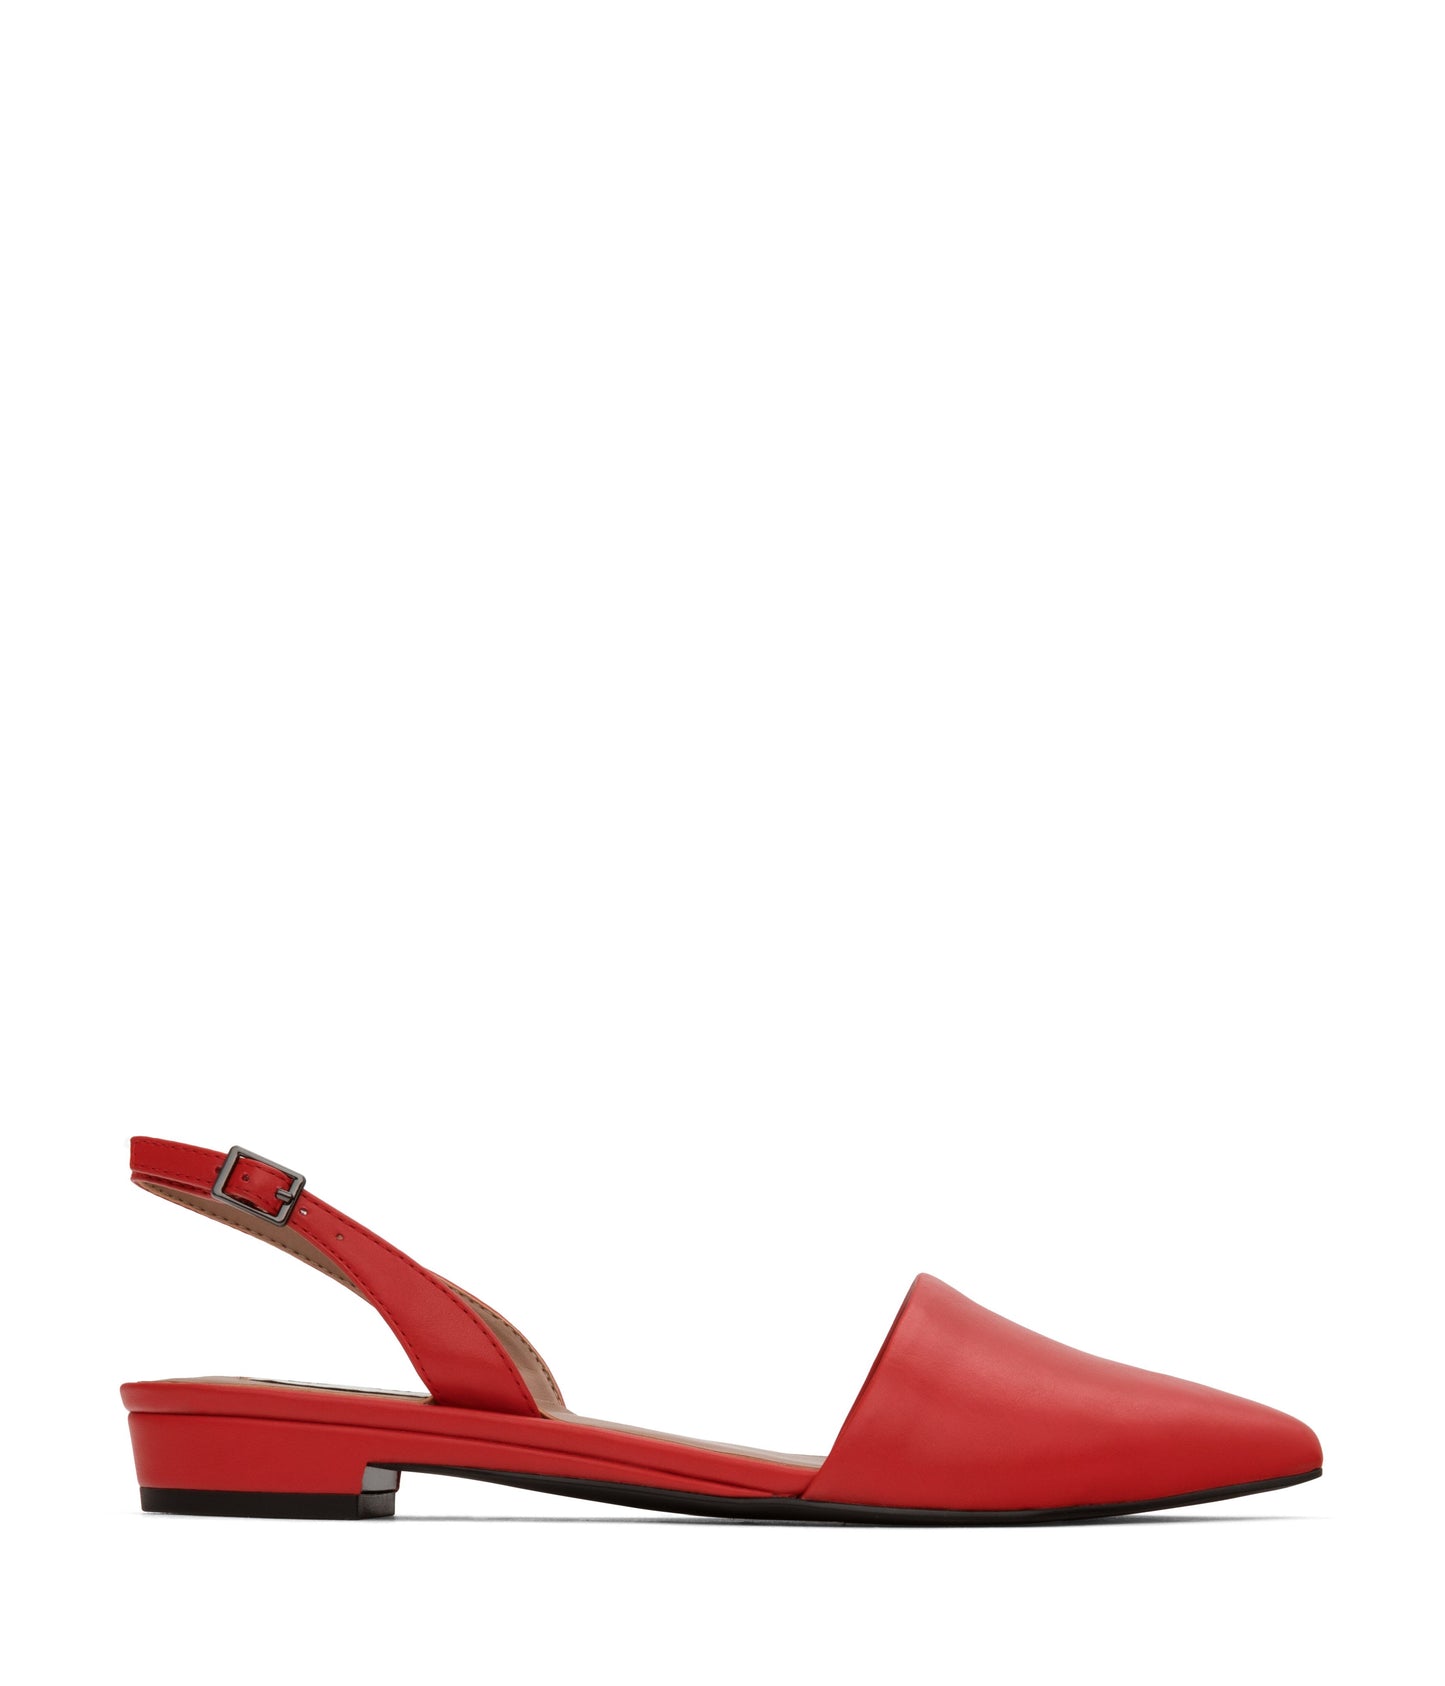 variant::rouge-- cory shoe rouge